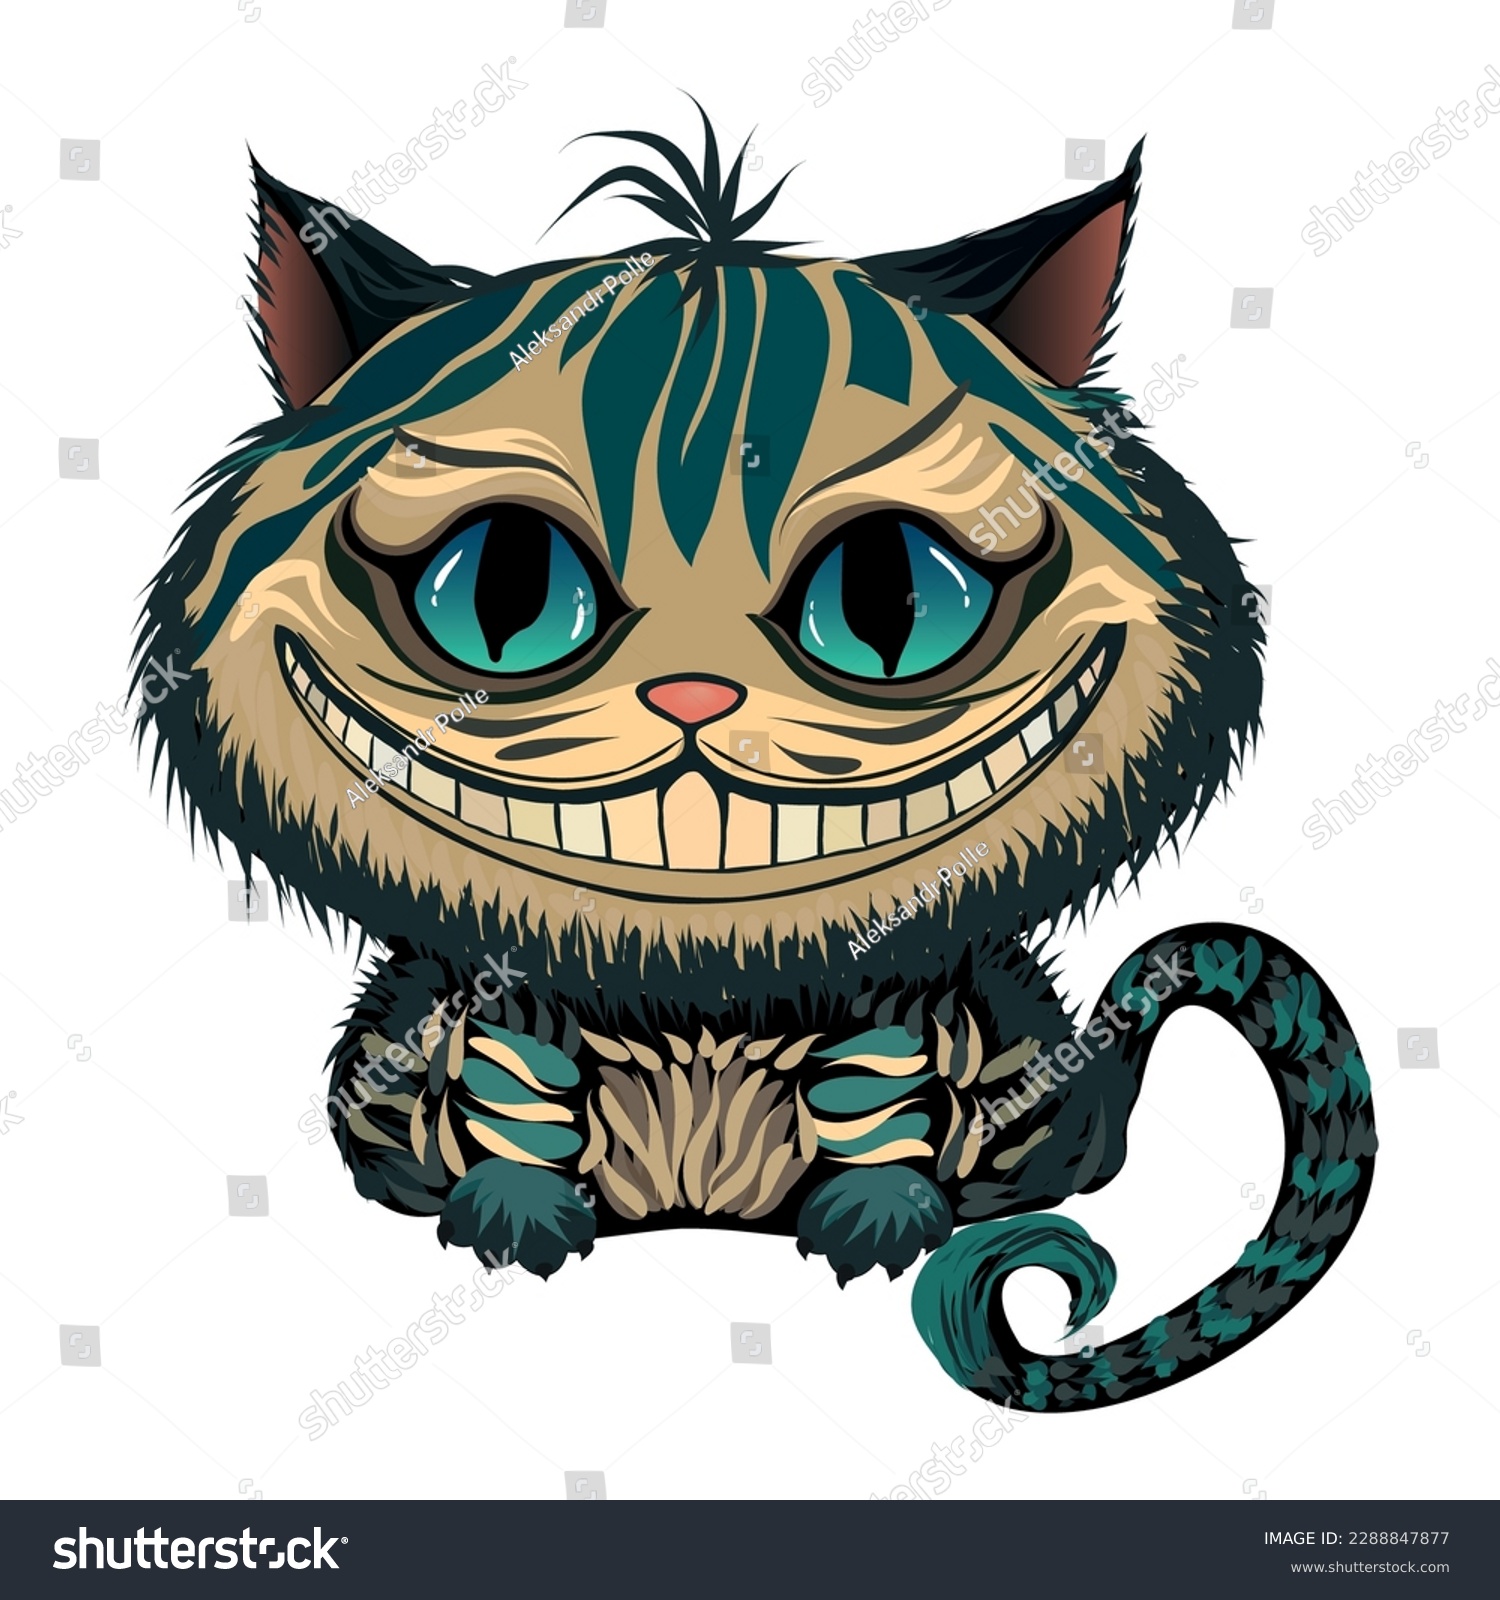 SVG of Cheshire cat with big eyes and a smile  cartoon illustration svg